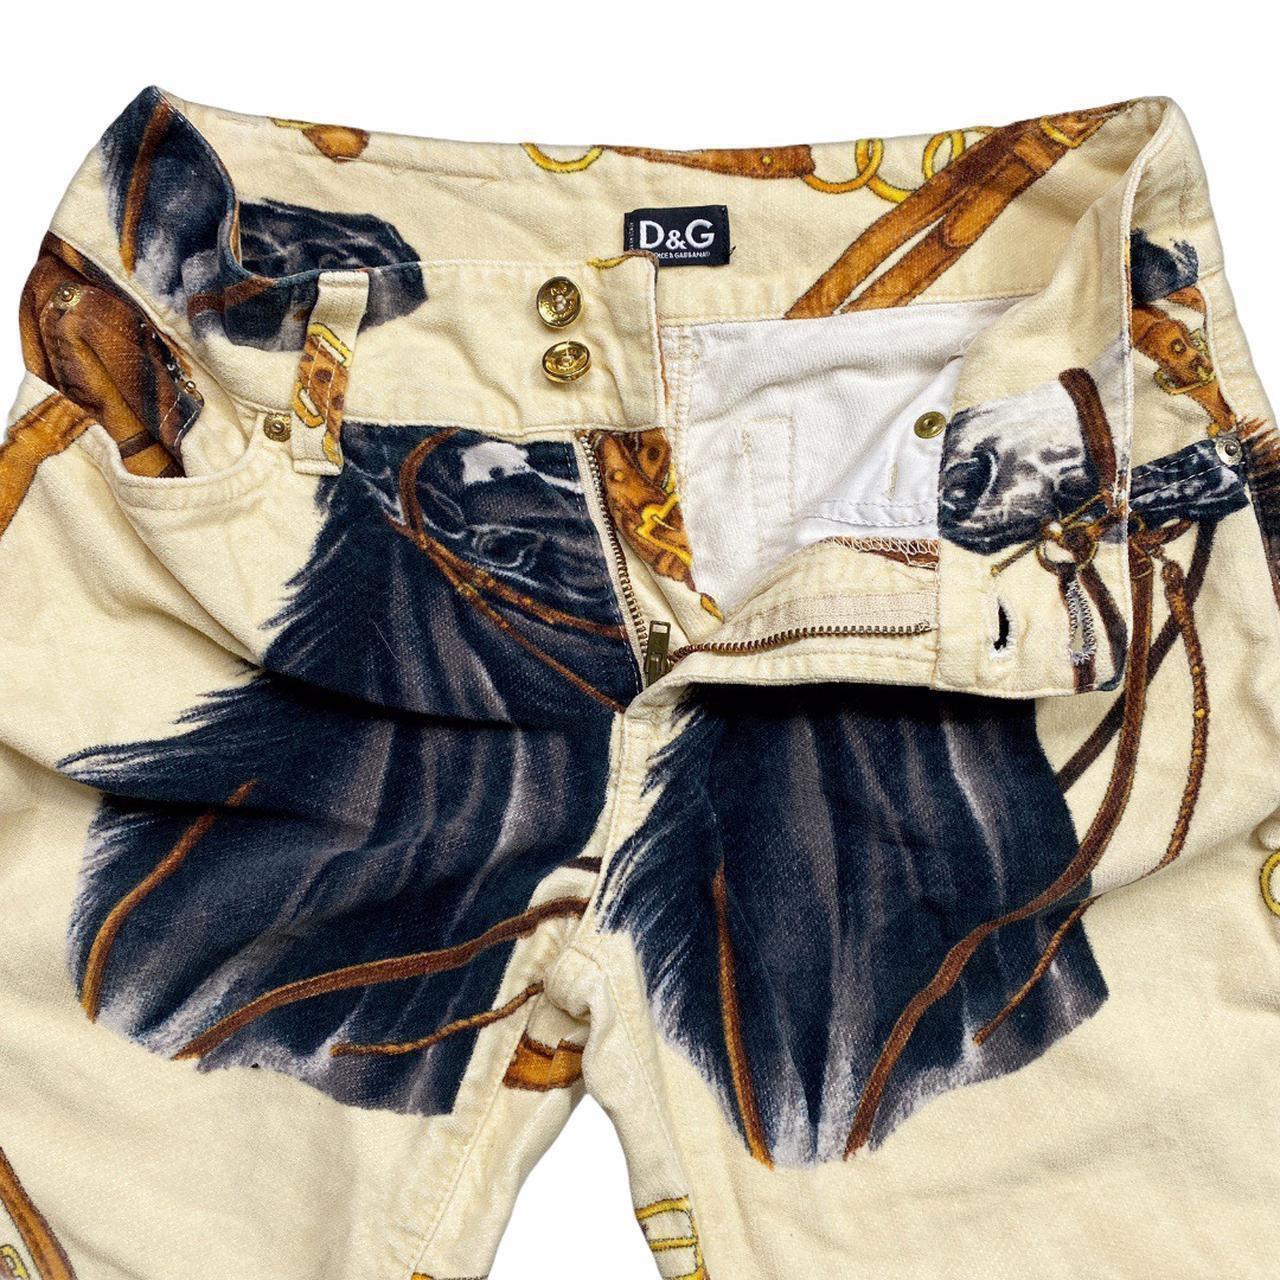 Vintage Dolce & Gabbana Trousers

Equestrian Horse Print Design

CONDITION: This item is a vintage/pre-worn piece so some signs of natural wear, age and minor imperfections are to be expected ,however item in good general condition for age.

SIZE: 